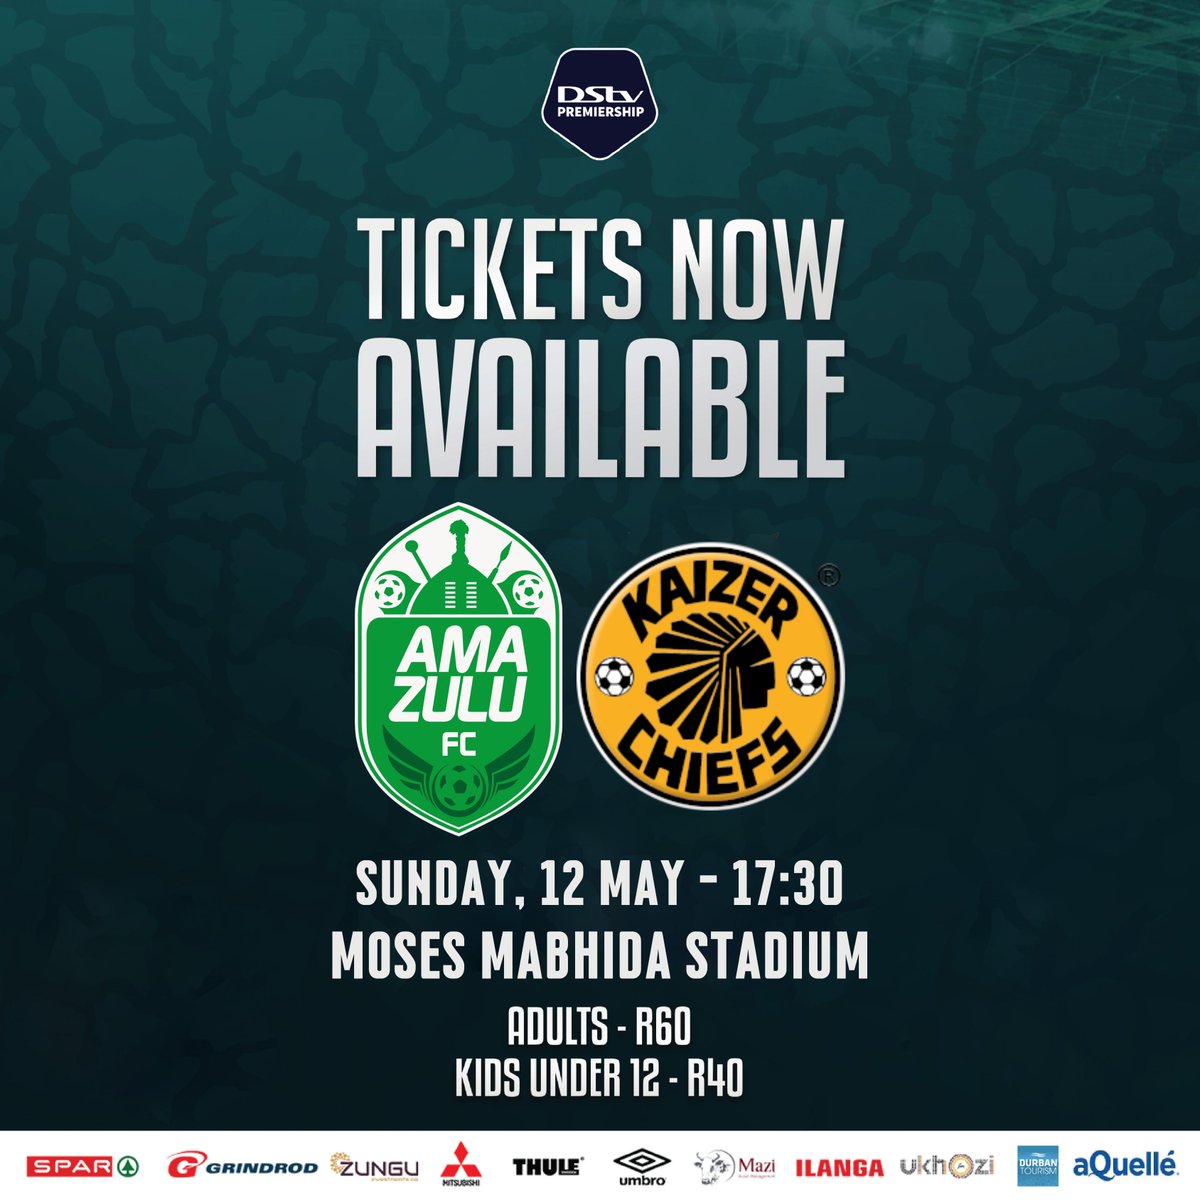 🟢 𝗧𝗜𝗖𝗞𝗘𝗧𝗦 𝗔𝗩𝗔𝗜𝗟𝗔𝗕𝗟𝗘 🎫 Get your tickets to our match against Kaizer Chiefs this Sunday, 12 May at Moses Mabhida Stadium. Join us at The Workshop at 1pm today to stand a chance to win tickets as well as other cool prizes. #Indlulamithi #HebeUsuthu…